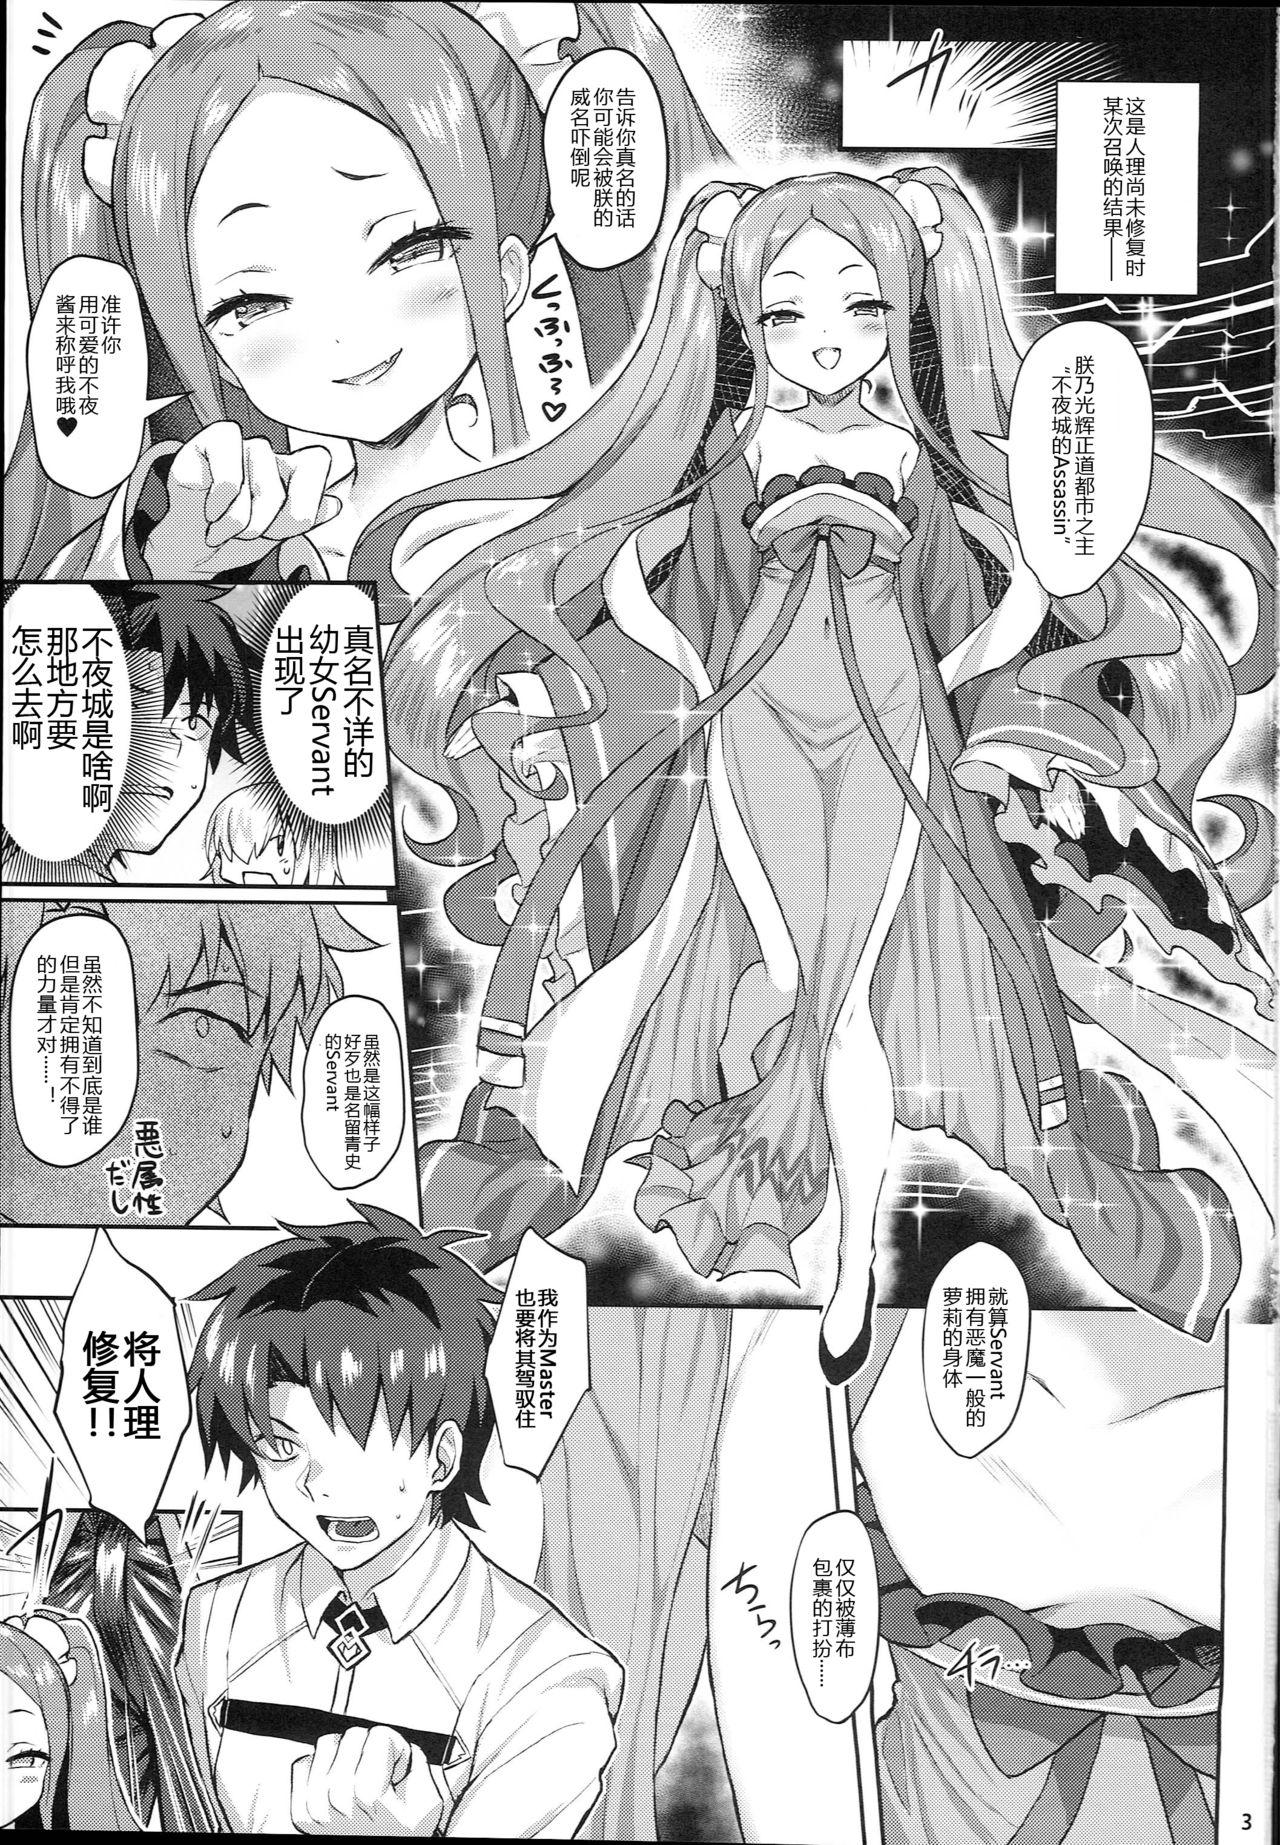 Top Fuya Syndrome - Sleepless Syndrome - Fate grand order Nasty Free Porn - Page 4